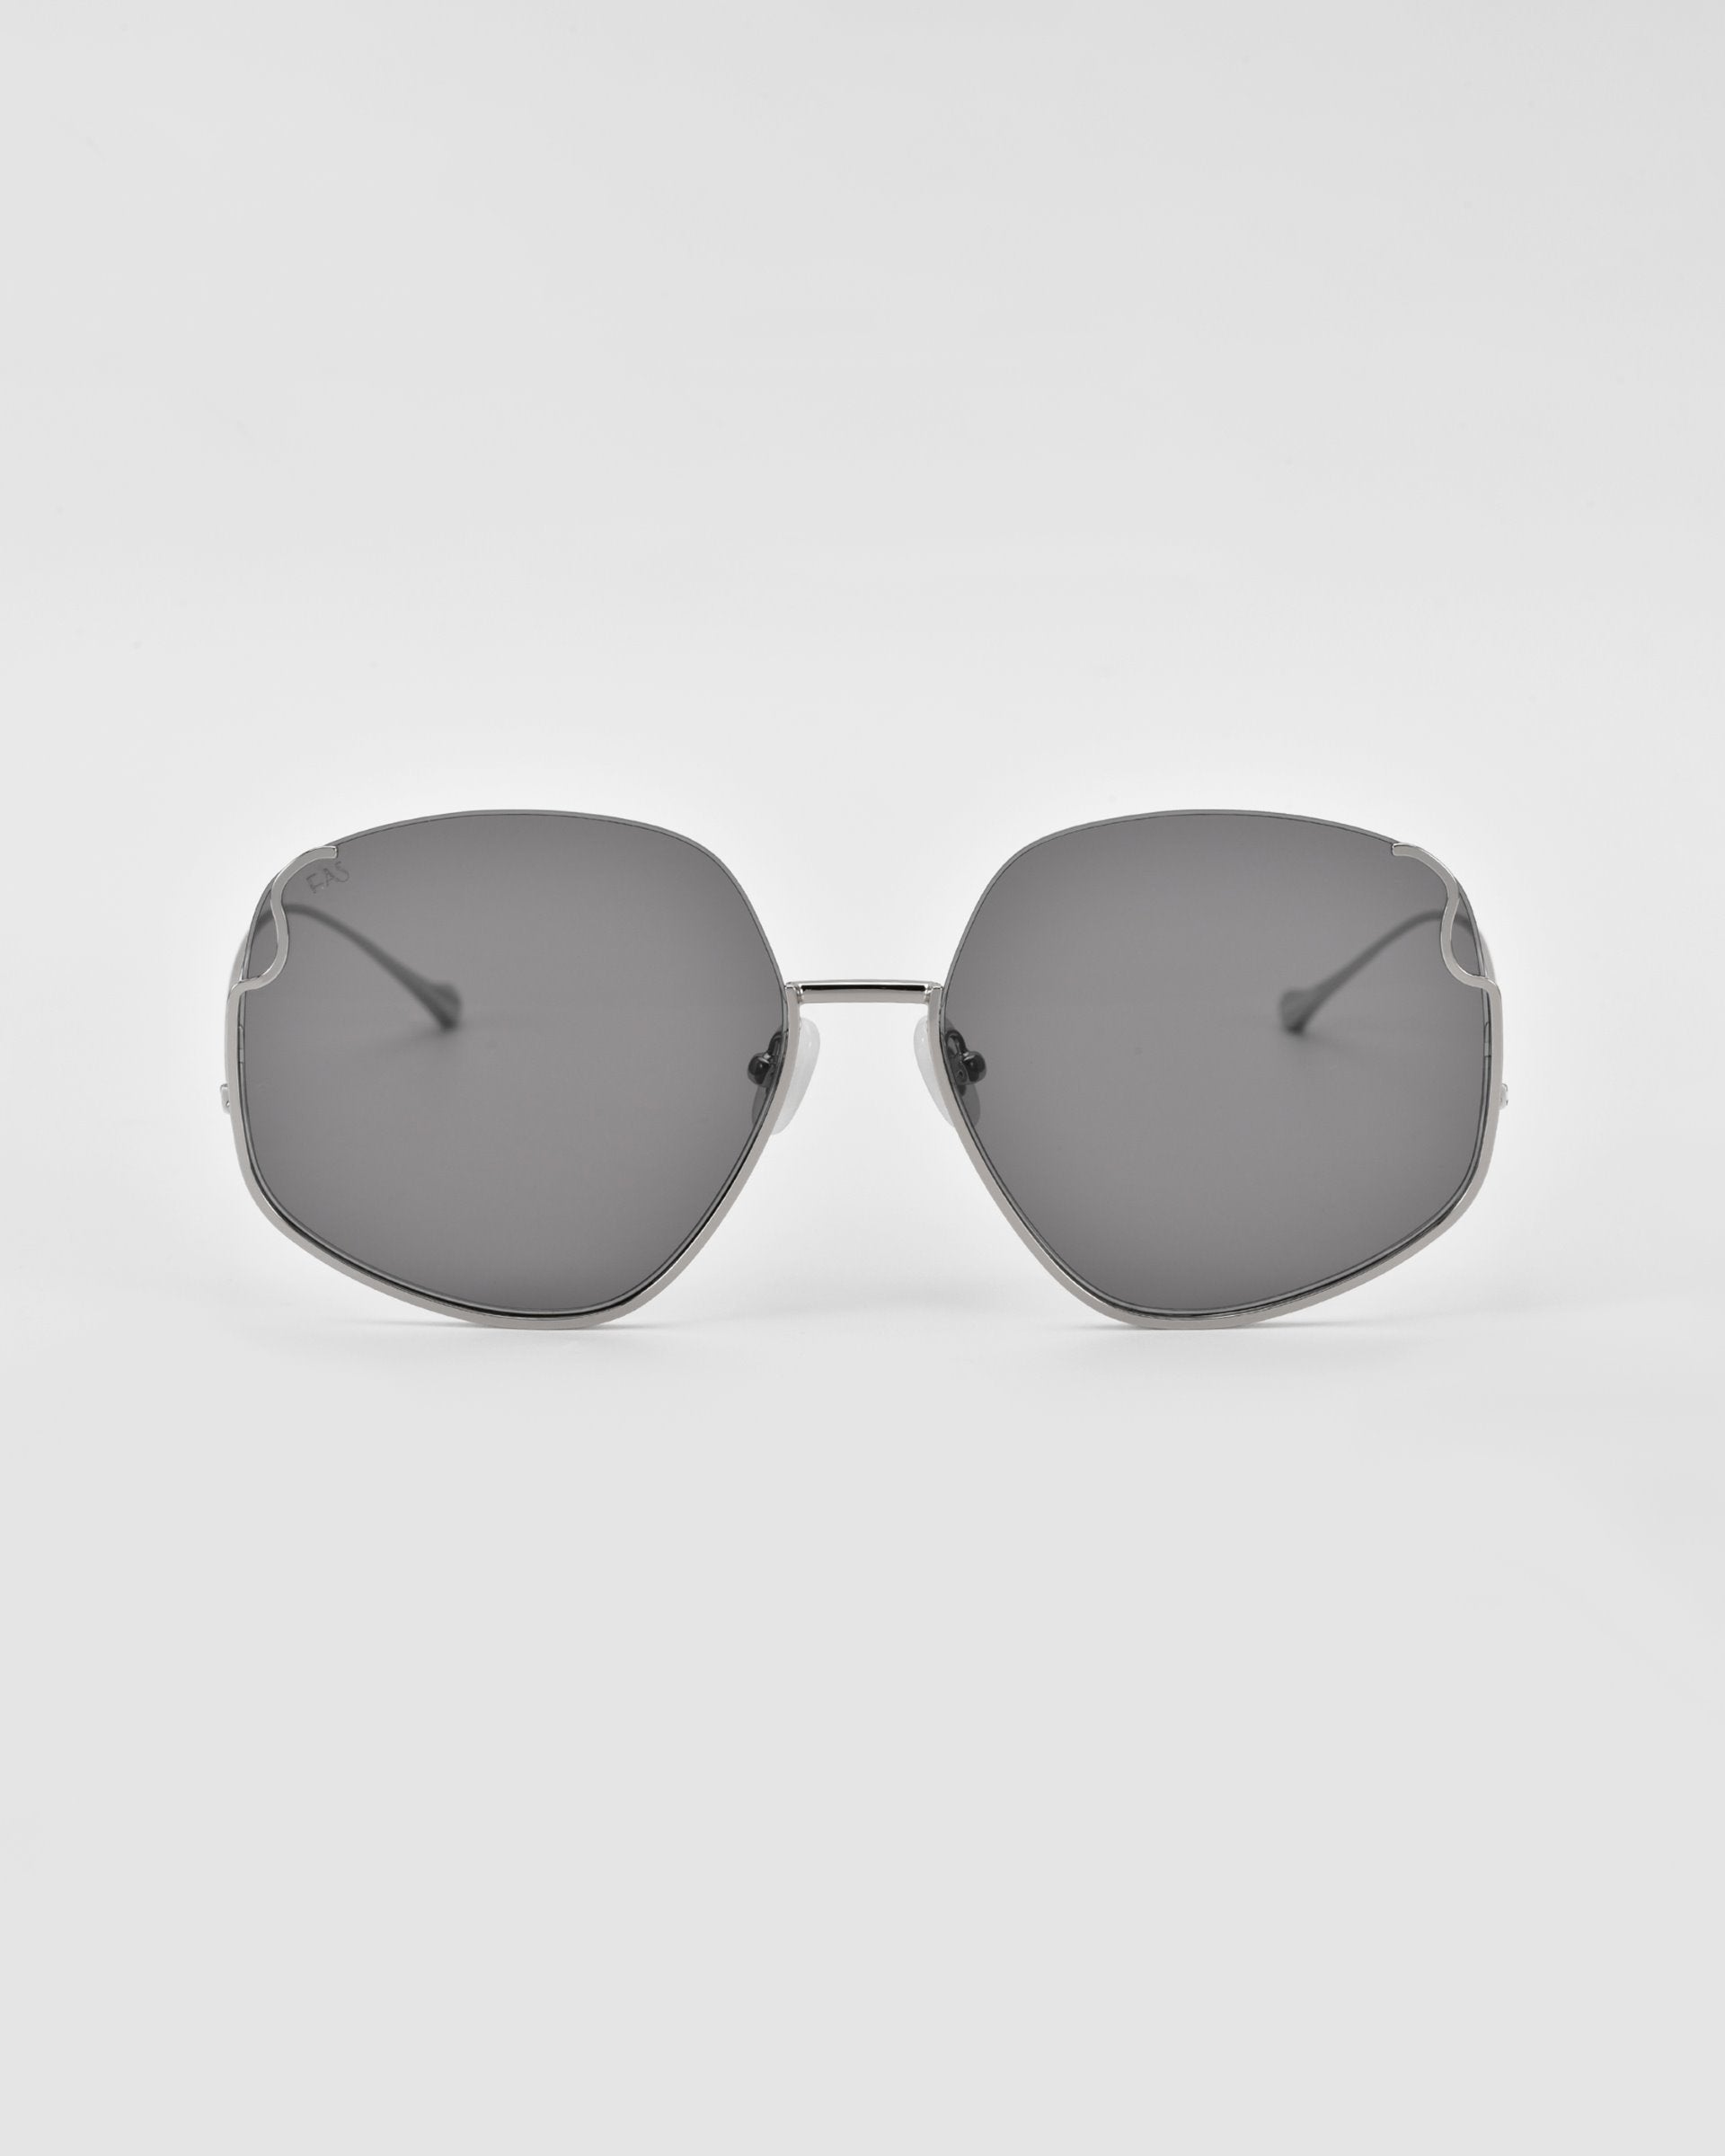 A pair of luxurious Drape sunglasses from For Art&#39;s Sake® with large, dark tinted lenses and thin metal frames featuring intricate metal detailing. The design is minimalistic with clean lines, providing a sophisticated look. The background is plain white, highlighting the Drape sunglasses from For Art&#39;s Sake®.